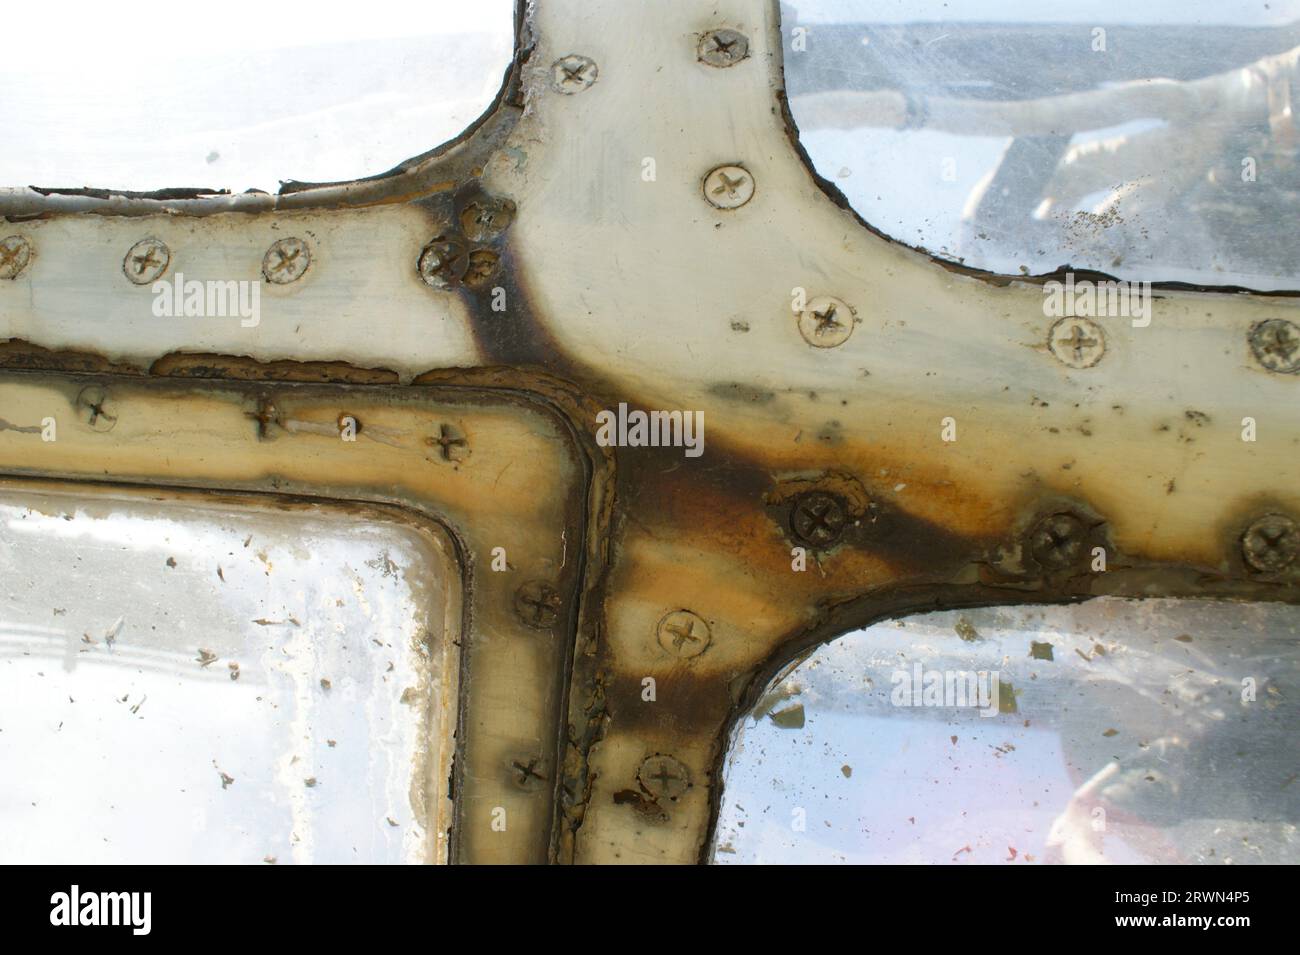 Rusty window frame of an old airplane with screws. Fragment of an airplane. Stock Photo